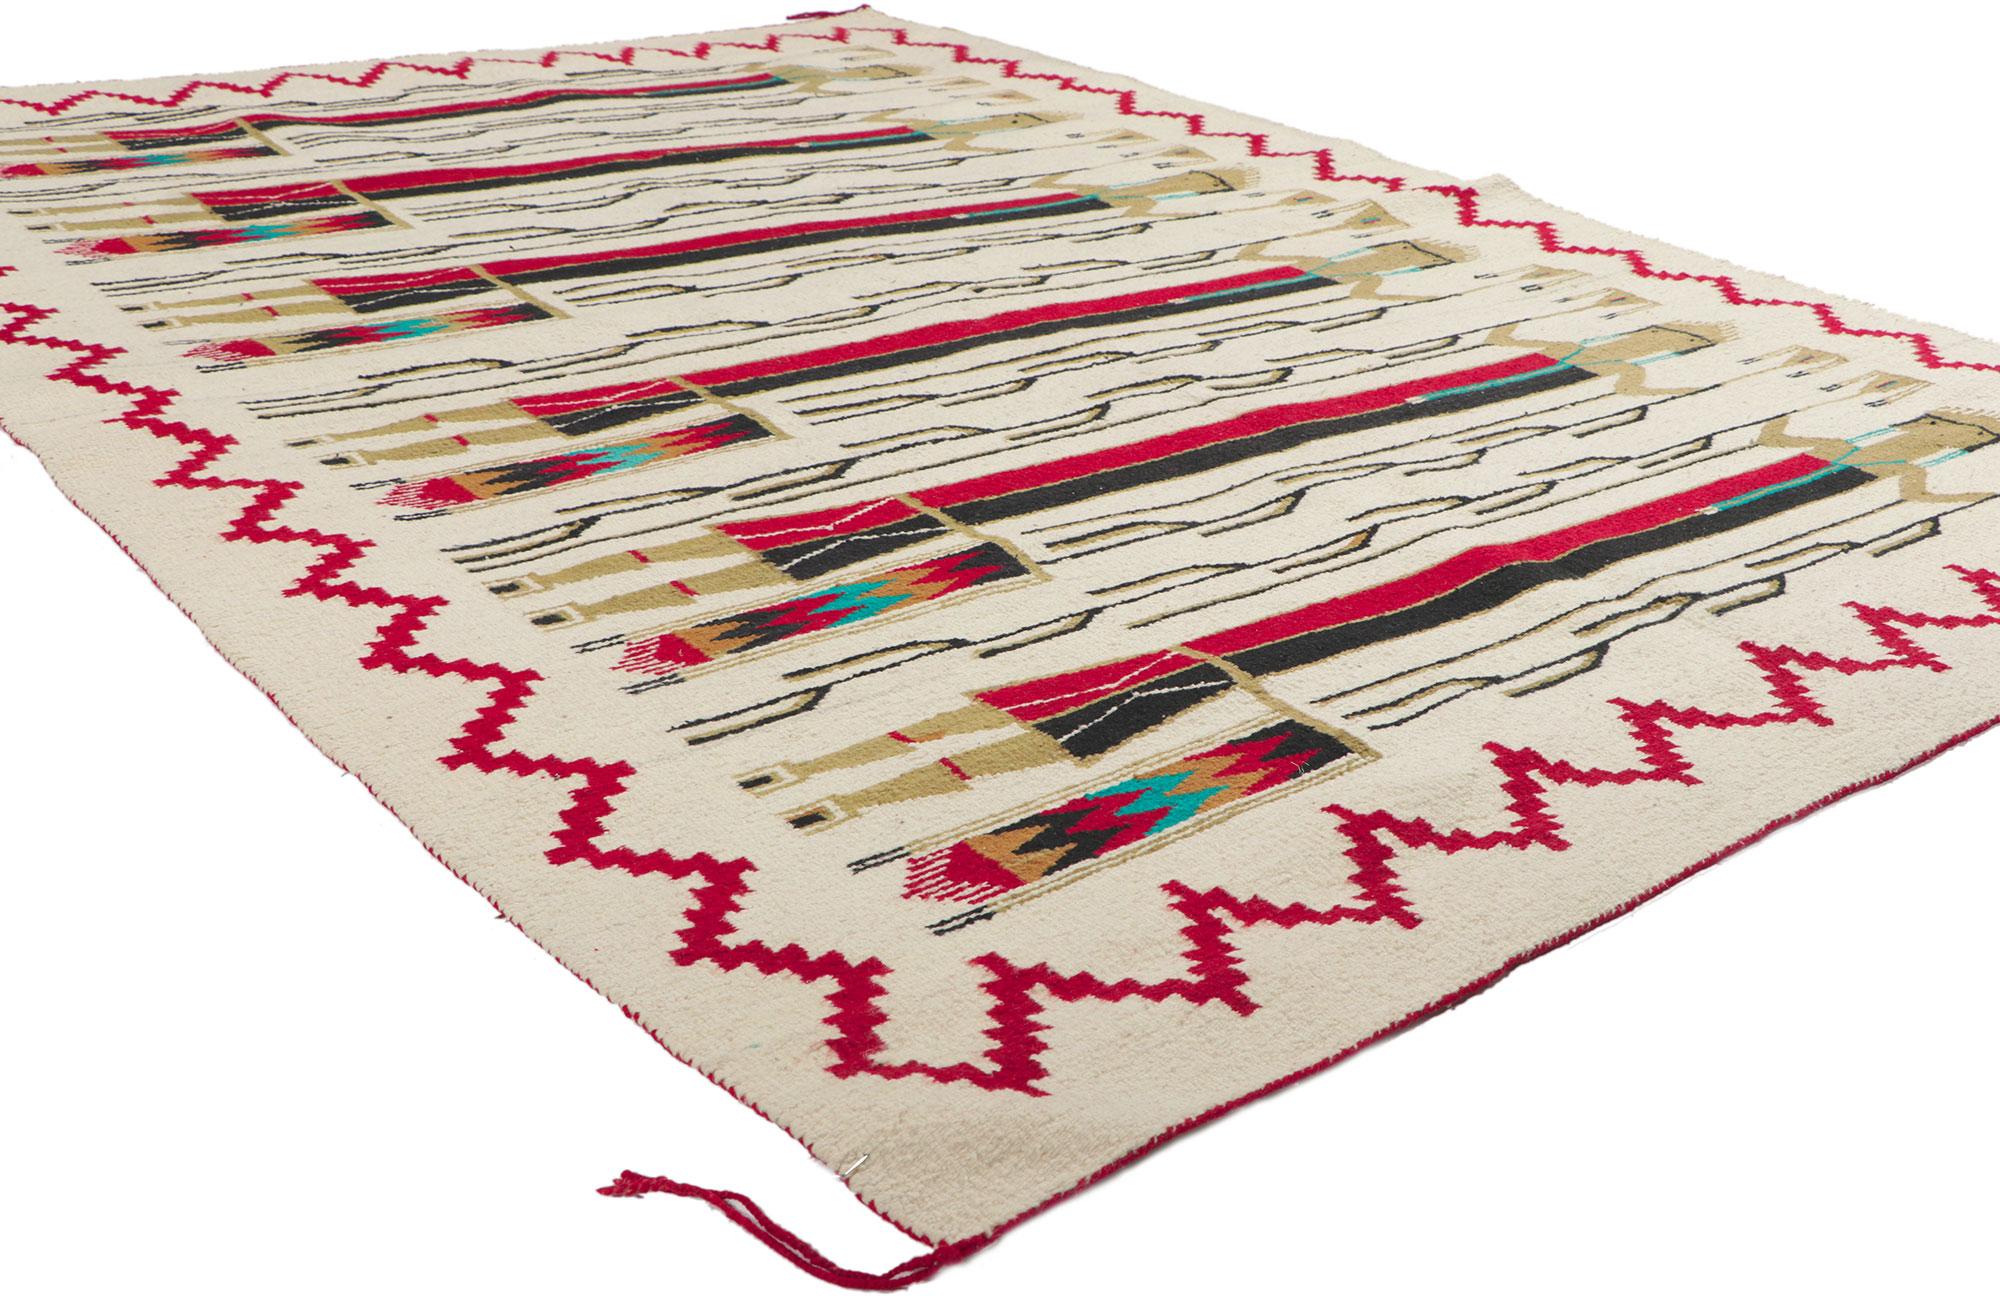 78502 Vintage Yeibichai Navajo Rug, 05'03 x 07'03. Yeibichai Navajo rugs are a distinctive type of Navajo weaving that depict figures from the Yeibichai dance, a ceremonial dance central to Navajo mythology and healing practices. These rugs feature